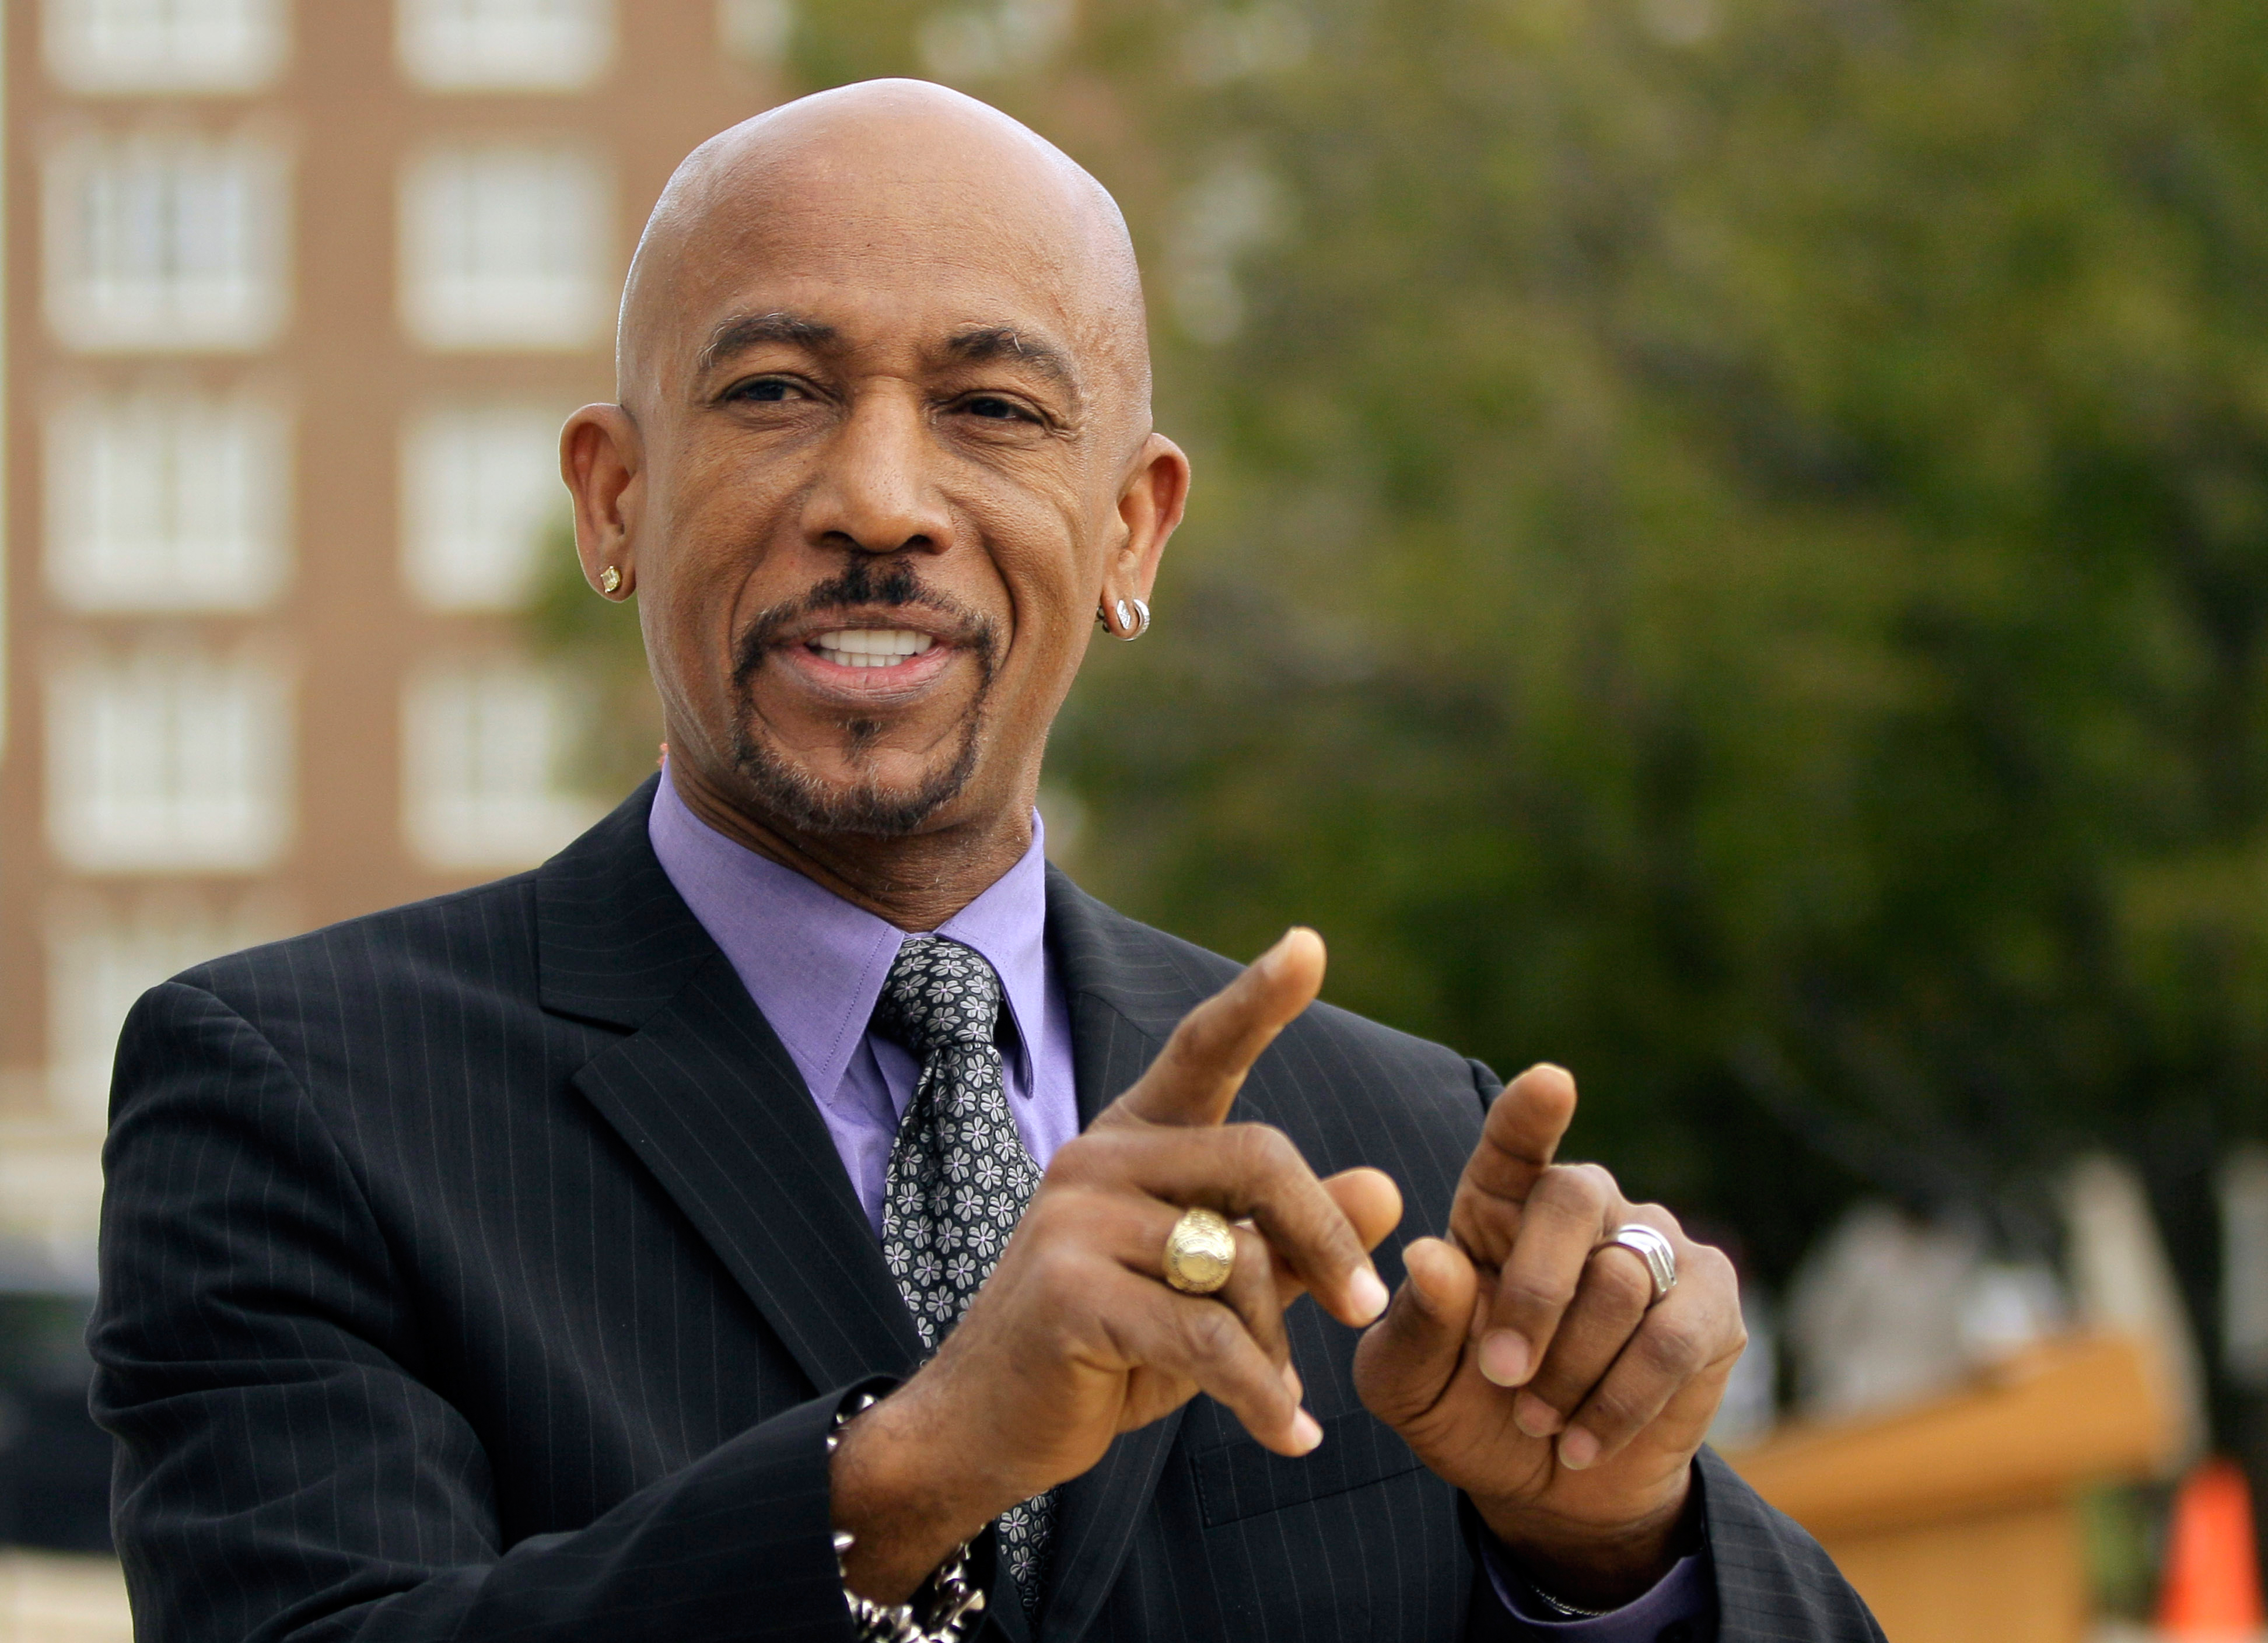 Montel Williams Got Called Out On Twitter For Endorsing Payday Loans—And He Didn't Handle It Well